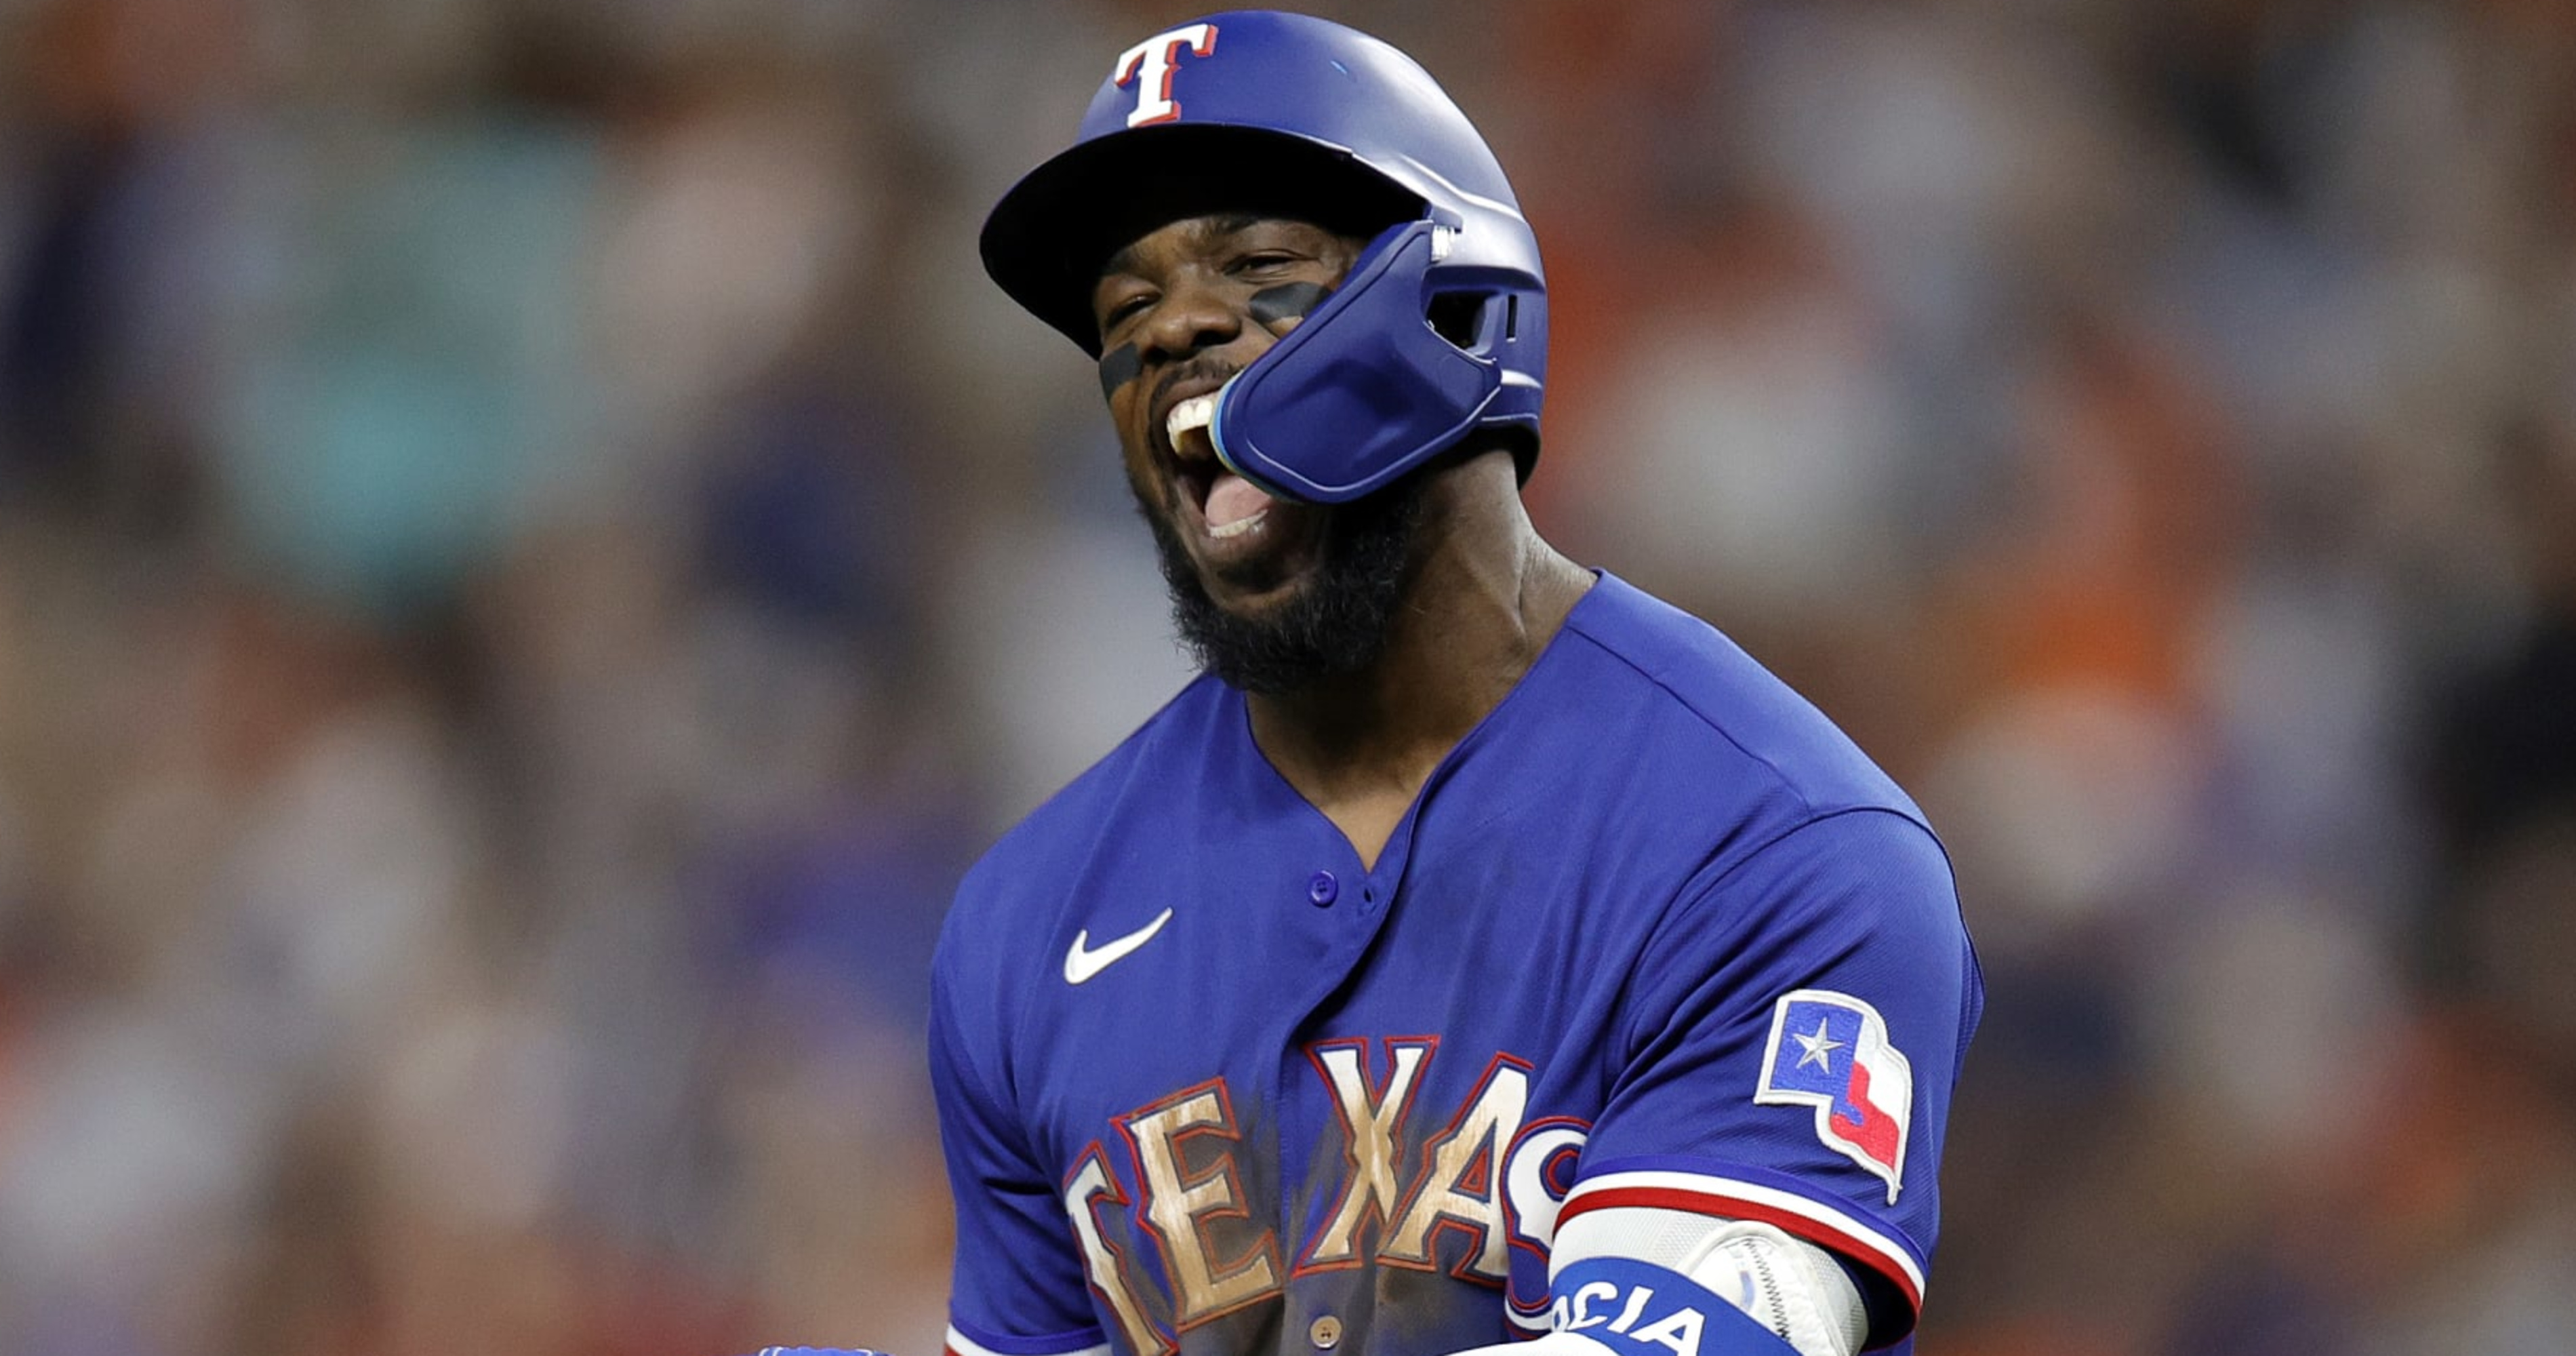 Rangers, Adolis Garcia rock Astros late to force Game 7 in ALCS